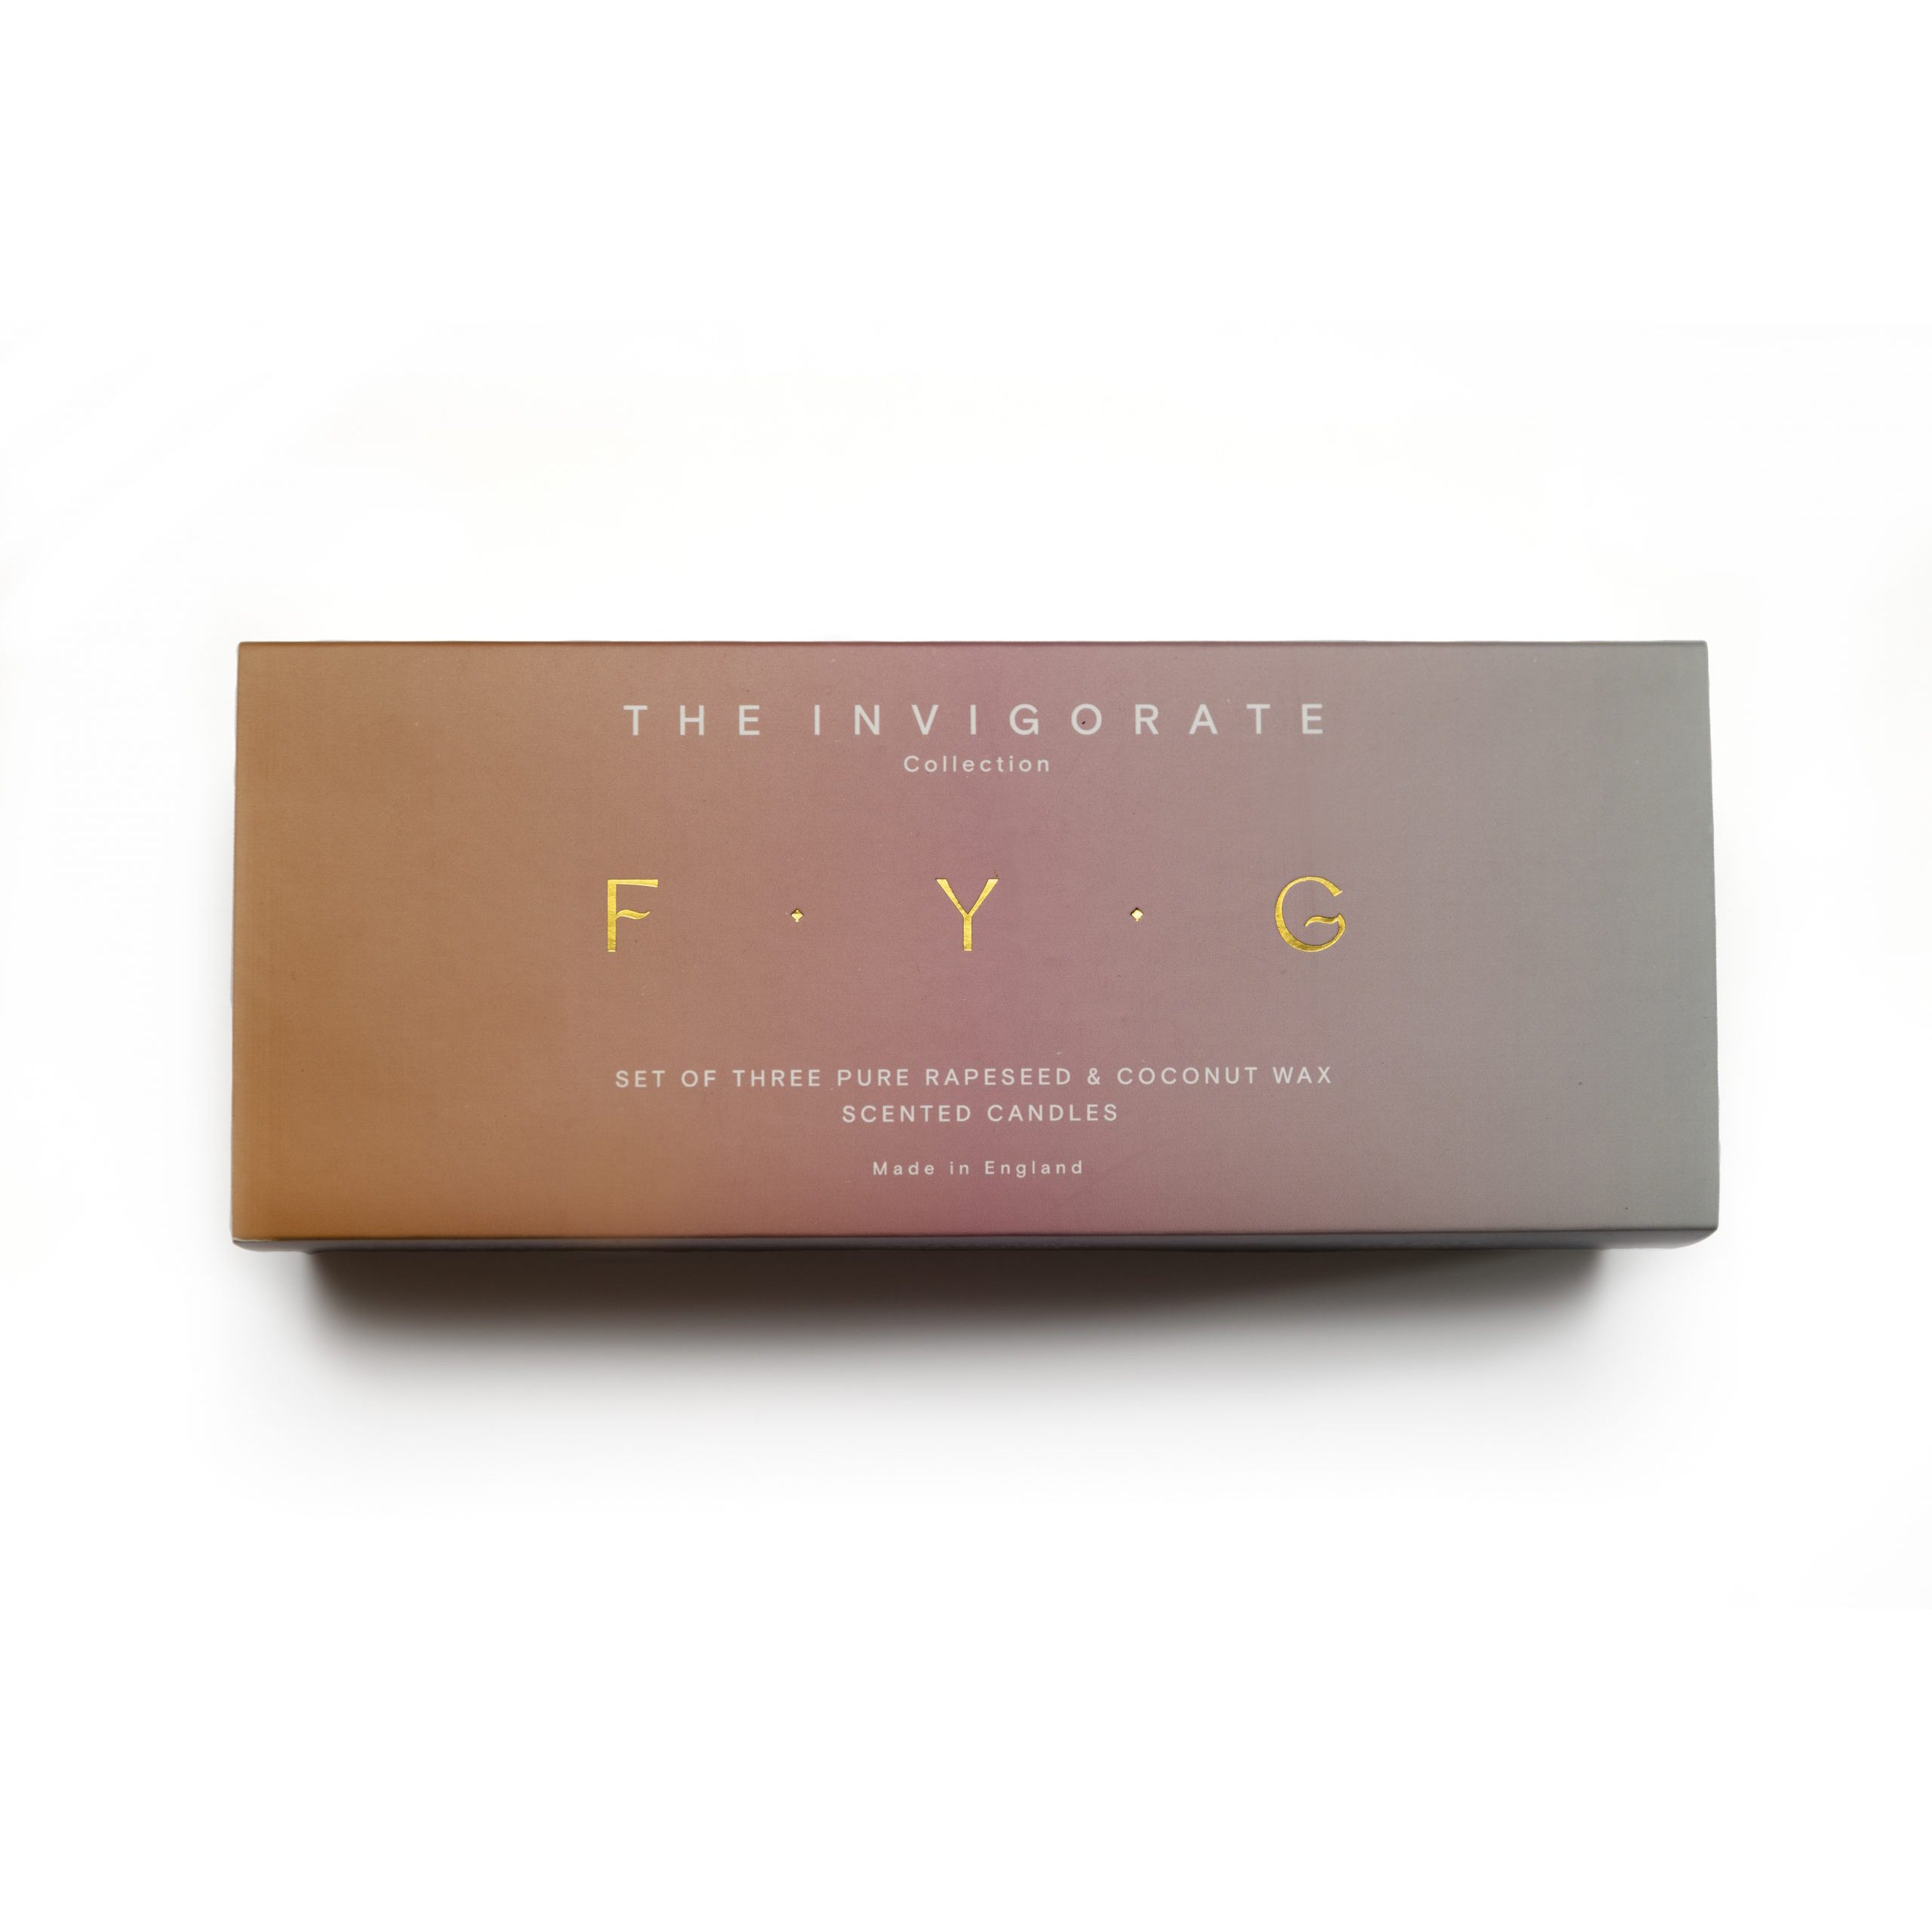 FYG The Invigorate Collection Candle Gift Set of 3